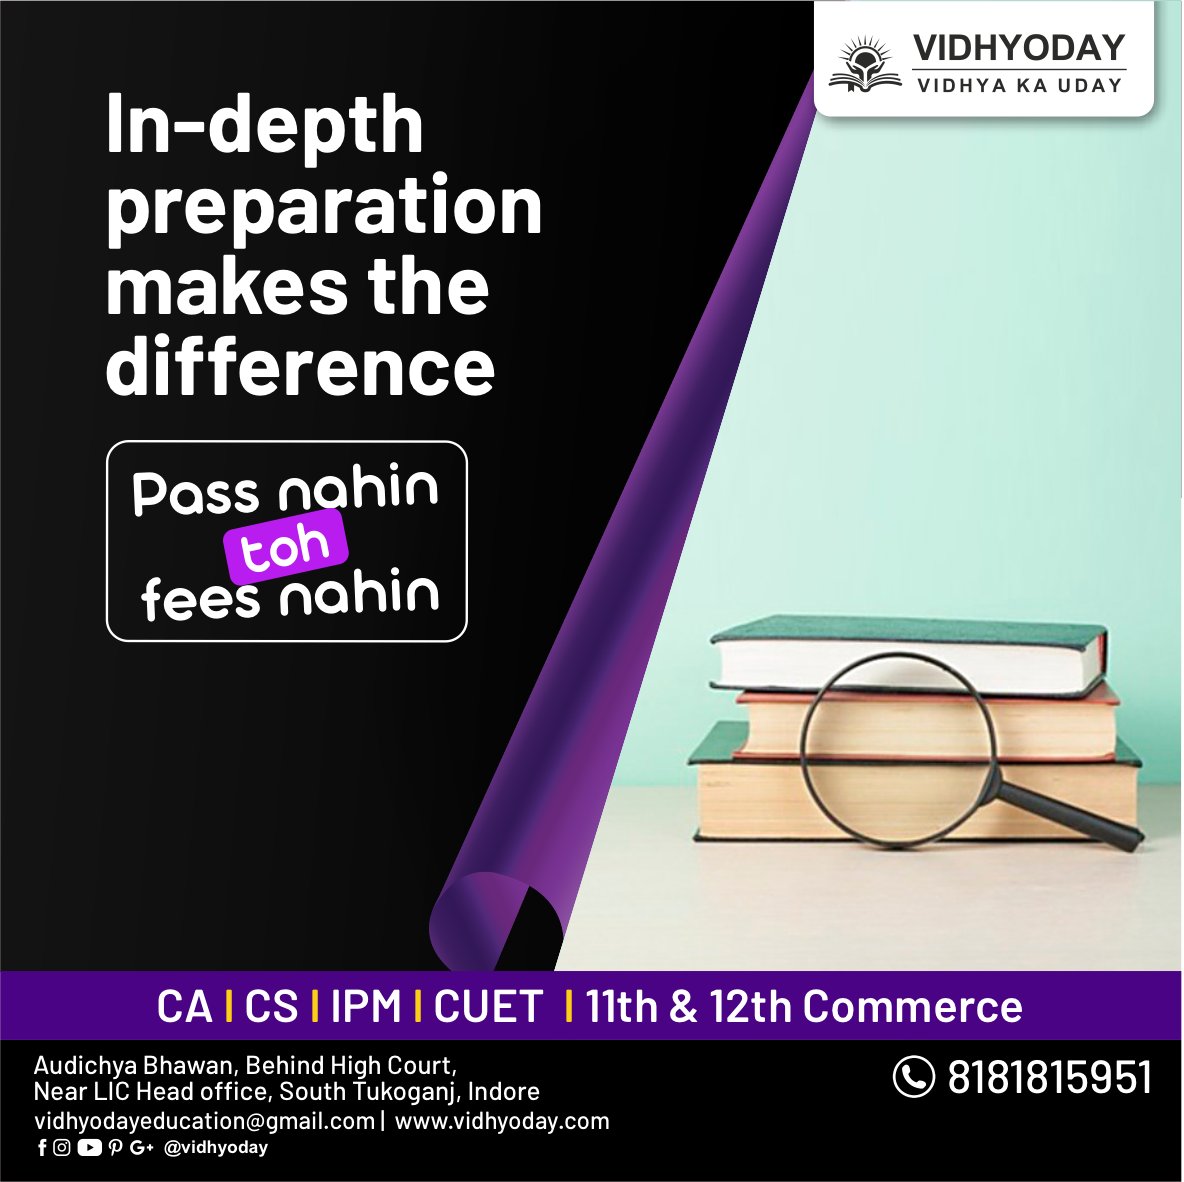 Expert mentorship and result-oriented pedagogy at Vidhyoday, the best commerce coaching helps you achieve your career goals.
__
#VidhyodayCommerceCoaching #VidhyaKaUday #PassNahiToFeesNahi #CAStudents #Vidhyoday #CA #CS #IPM #CUET #CommerceCoaching